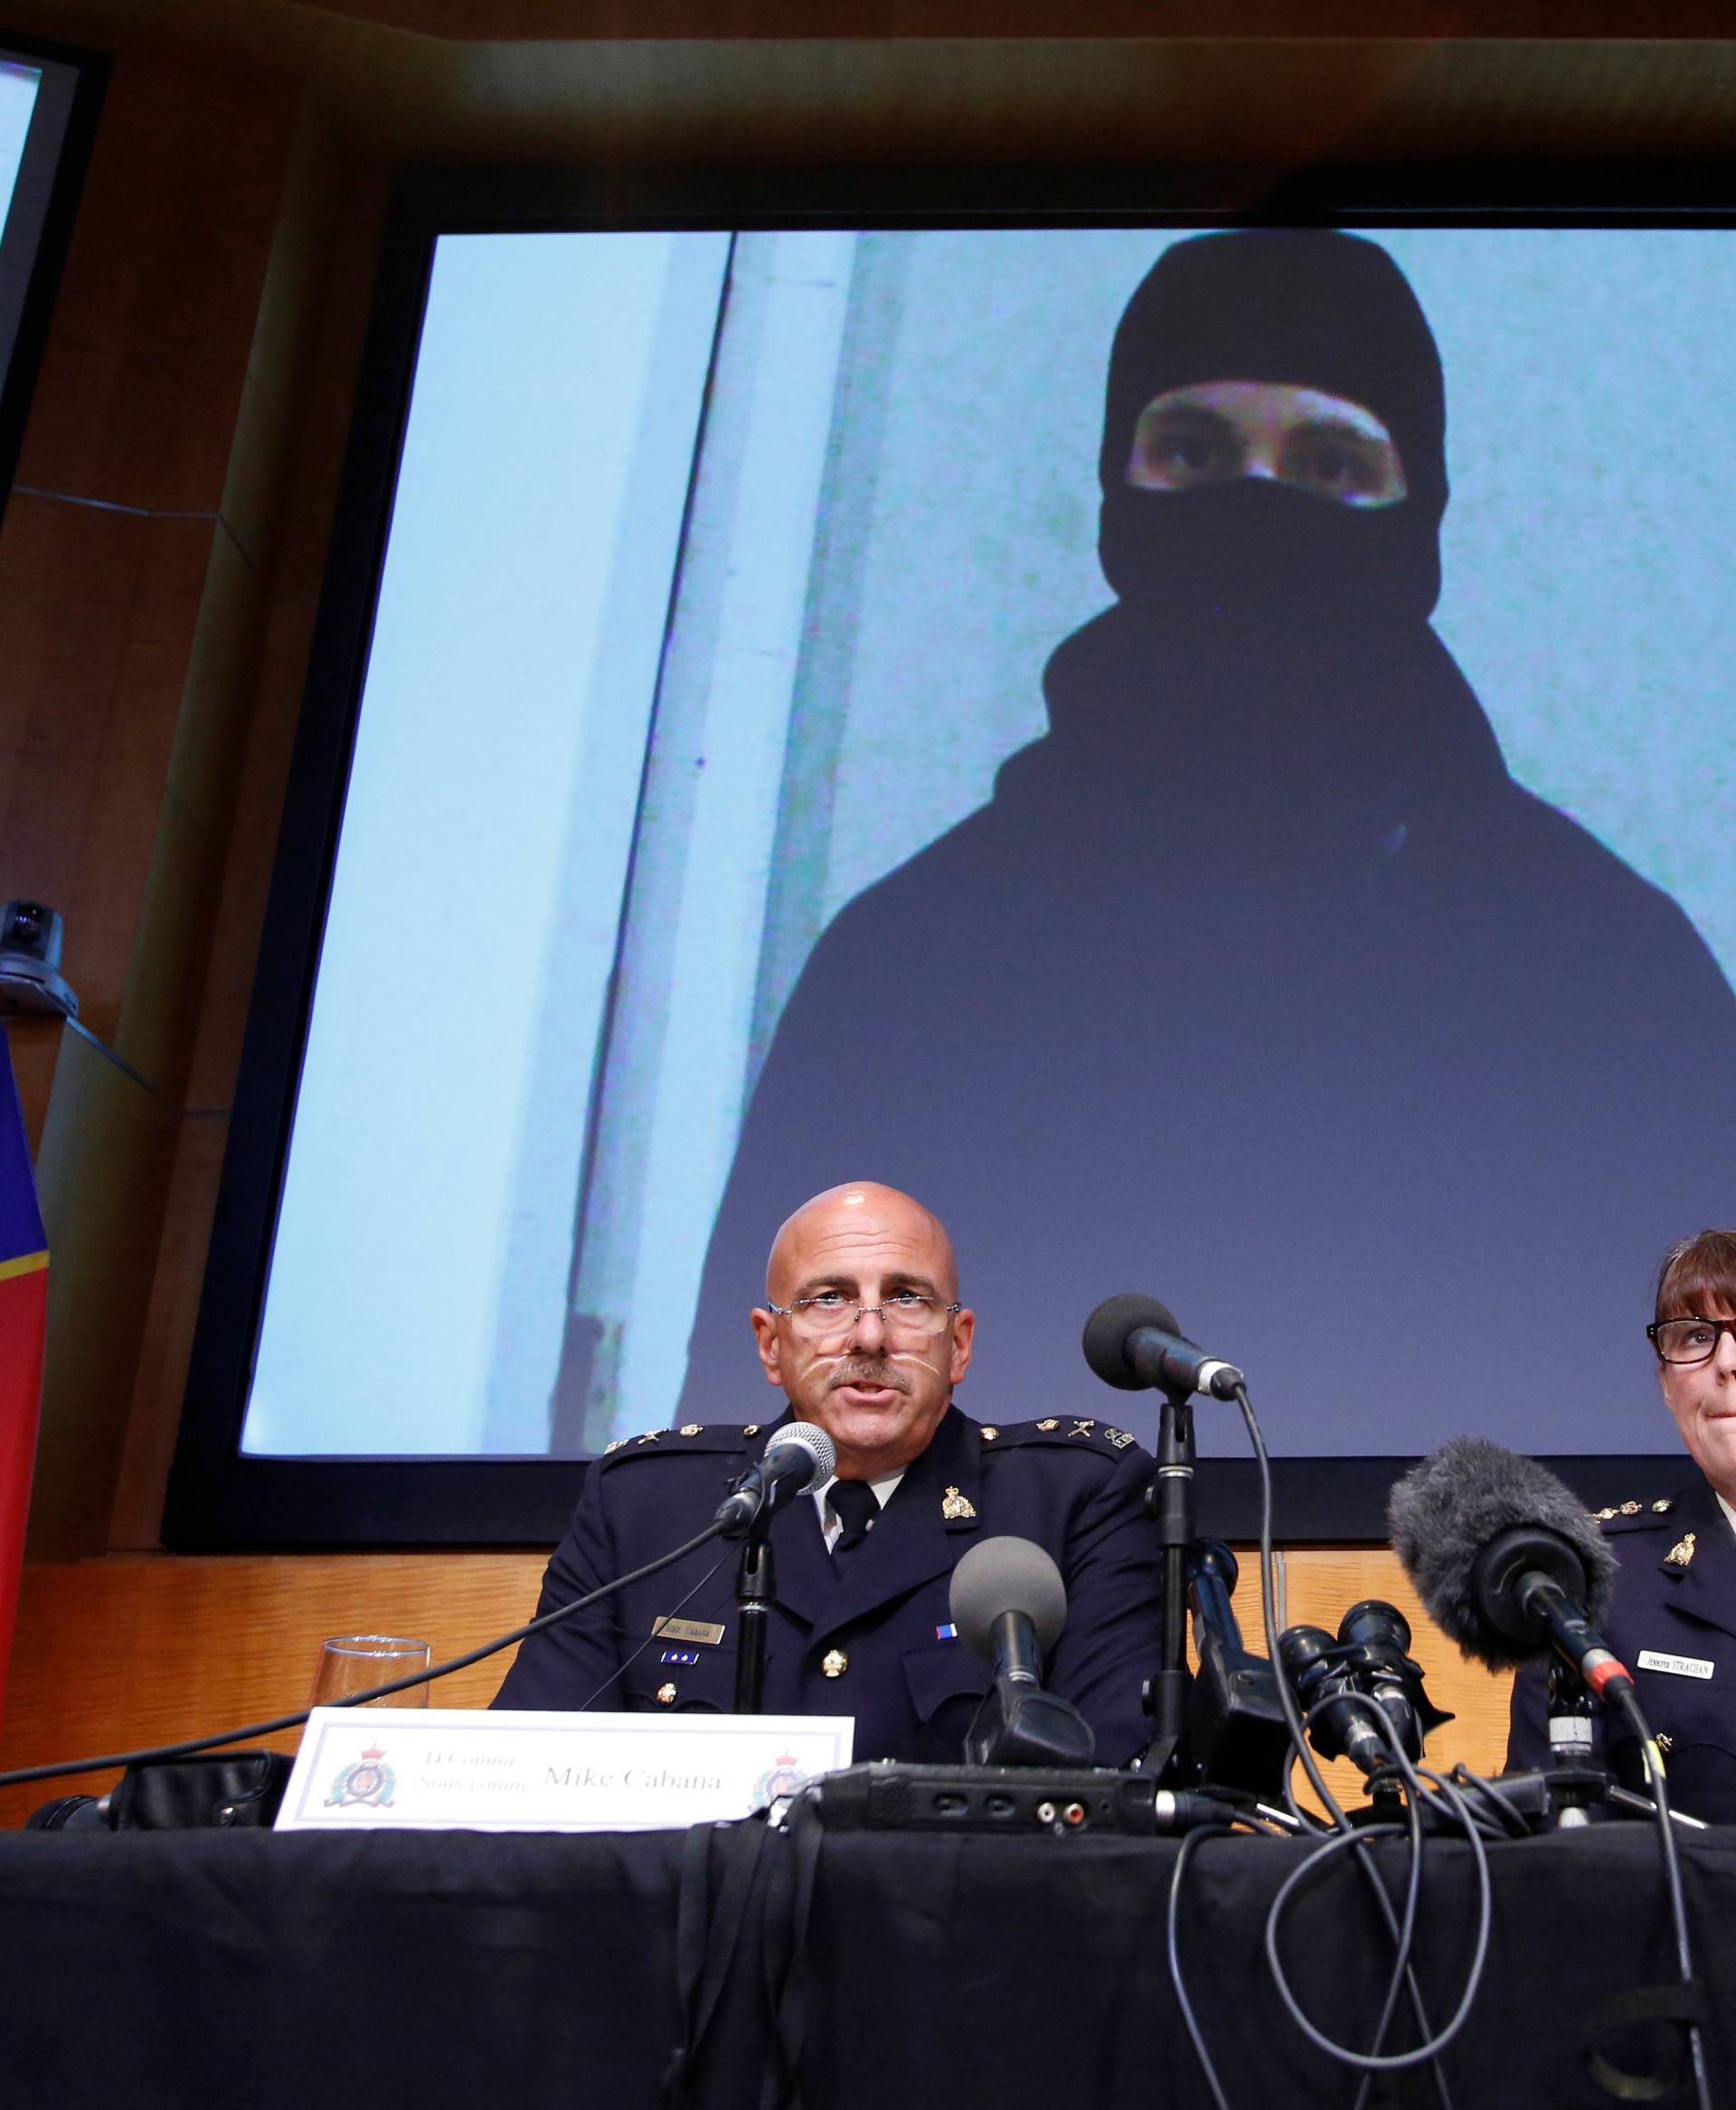 An image of Aaron Driver is projected on a screen during a news conference in Ottawa